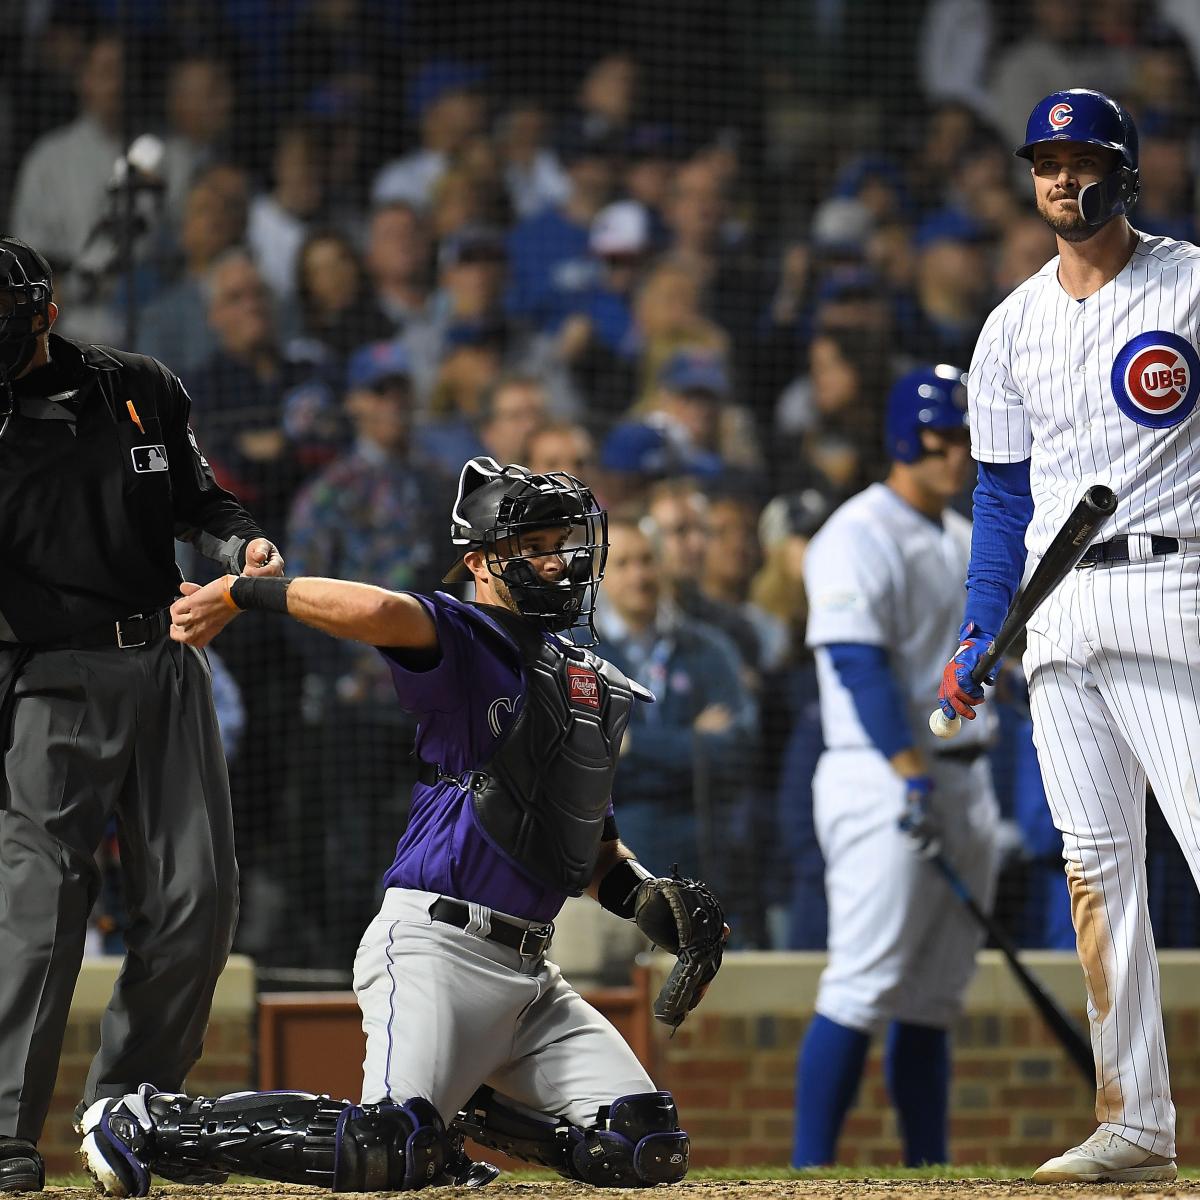 Kris Bryant reportedly still open to contract extension with Cubs